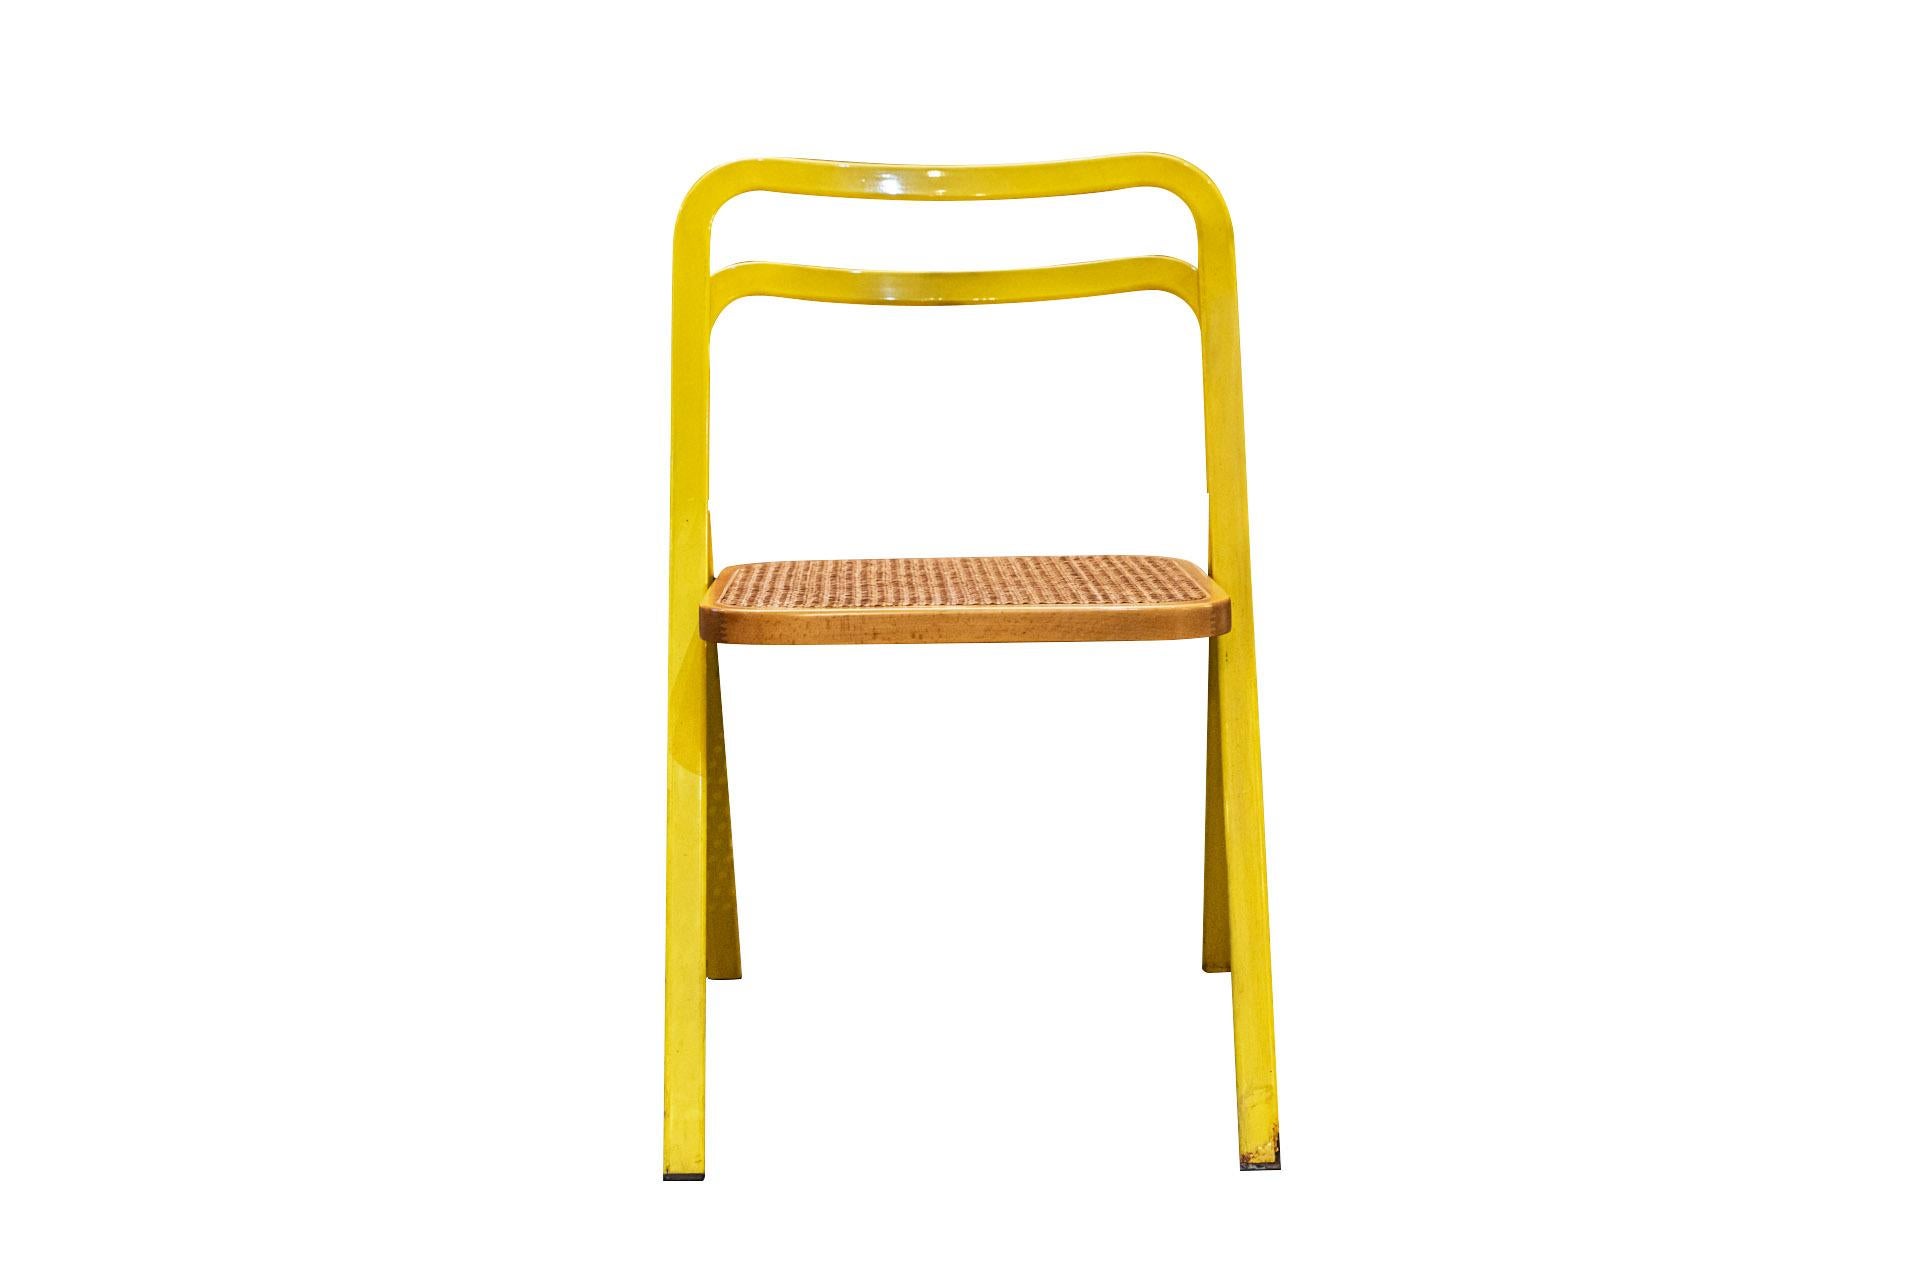 Giorgio Cattelan for Cidue, Set of six folding chairs,
Yellow lacquered iron and seat in canage and wood,
Publisher label,
circa 1970, Italy.

Measures : Height 78 cm, Width 50, Depth 49 cm.

Born in Thiene Italy, Giorgio Cattelan is the founder of